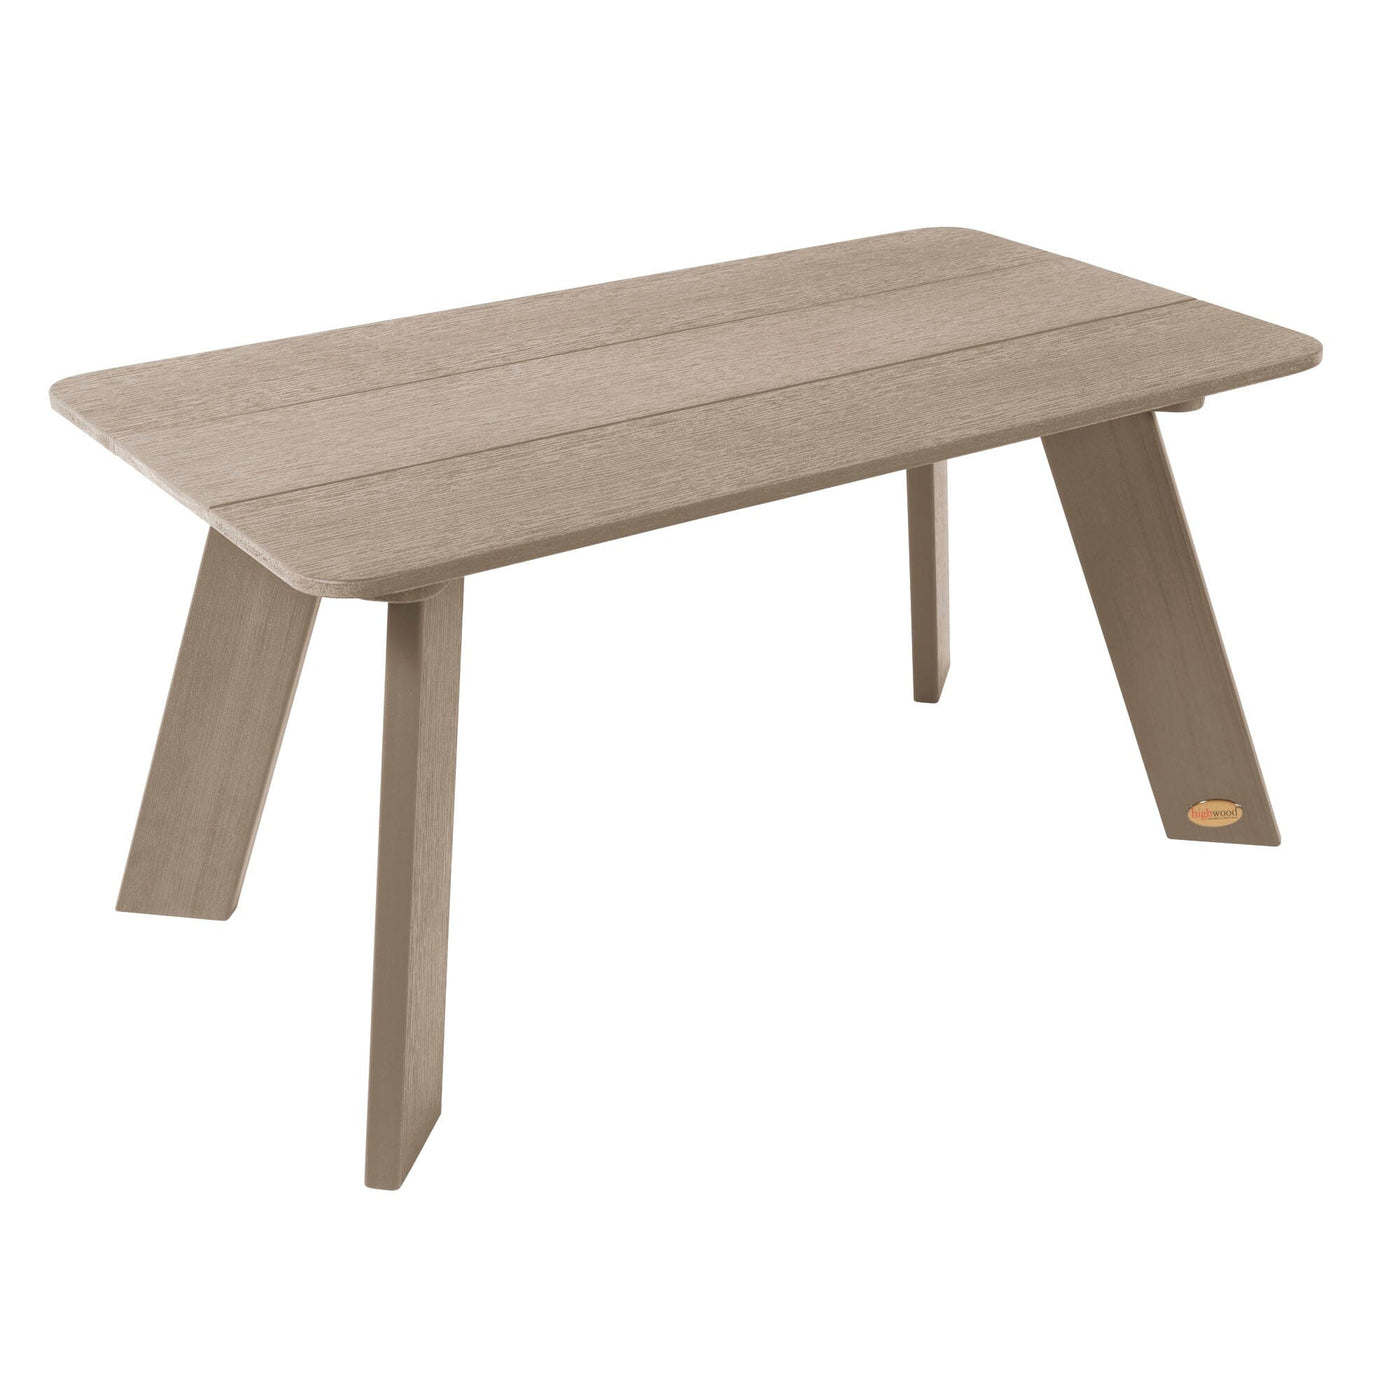 Italica Modern Conversation table in Woodland brown